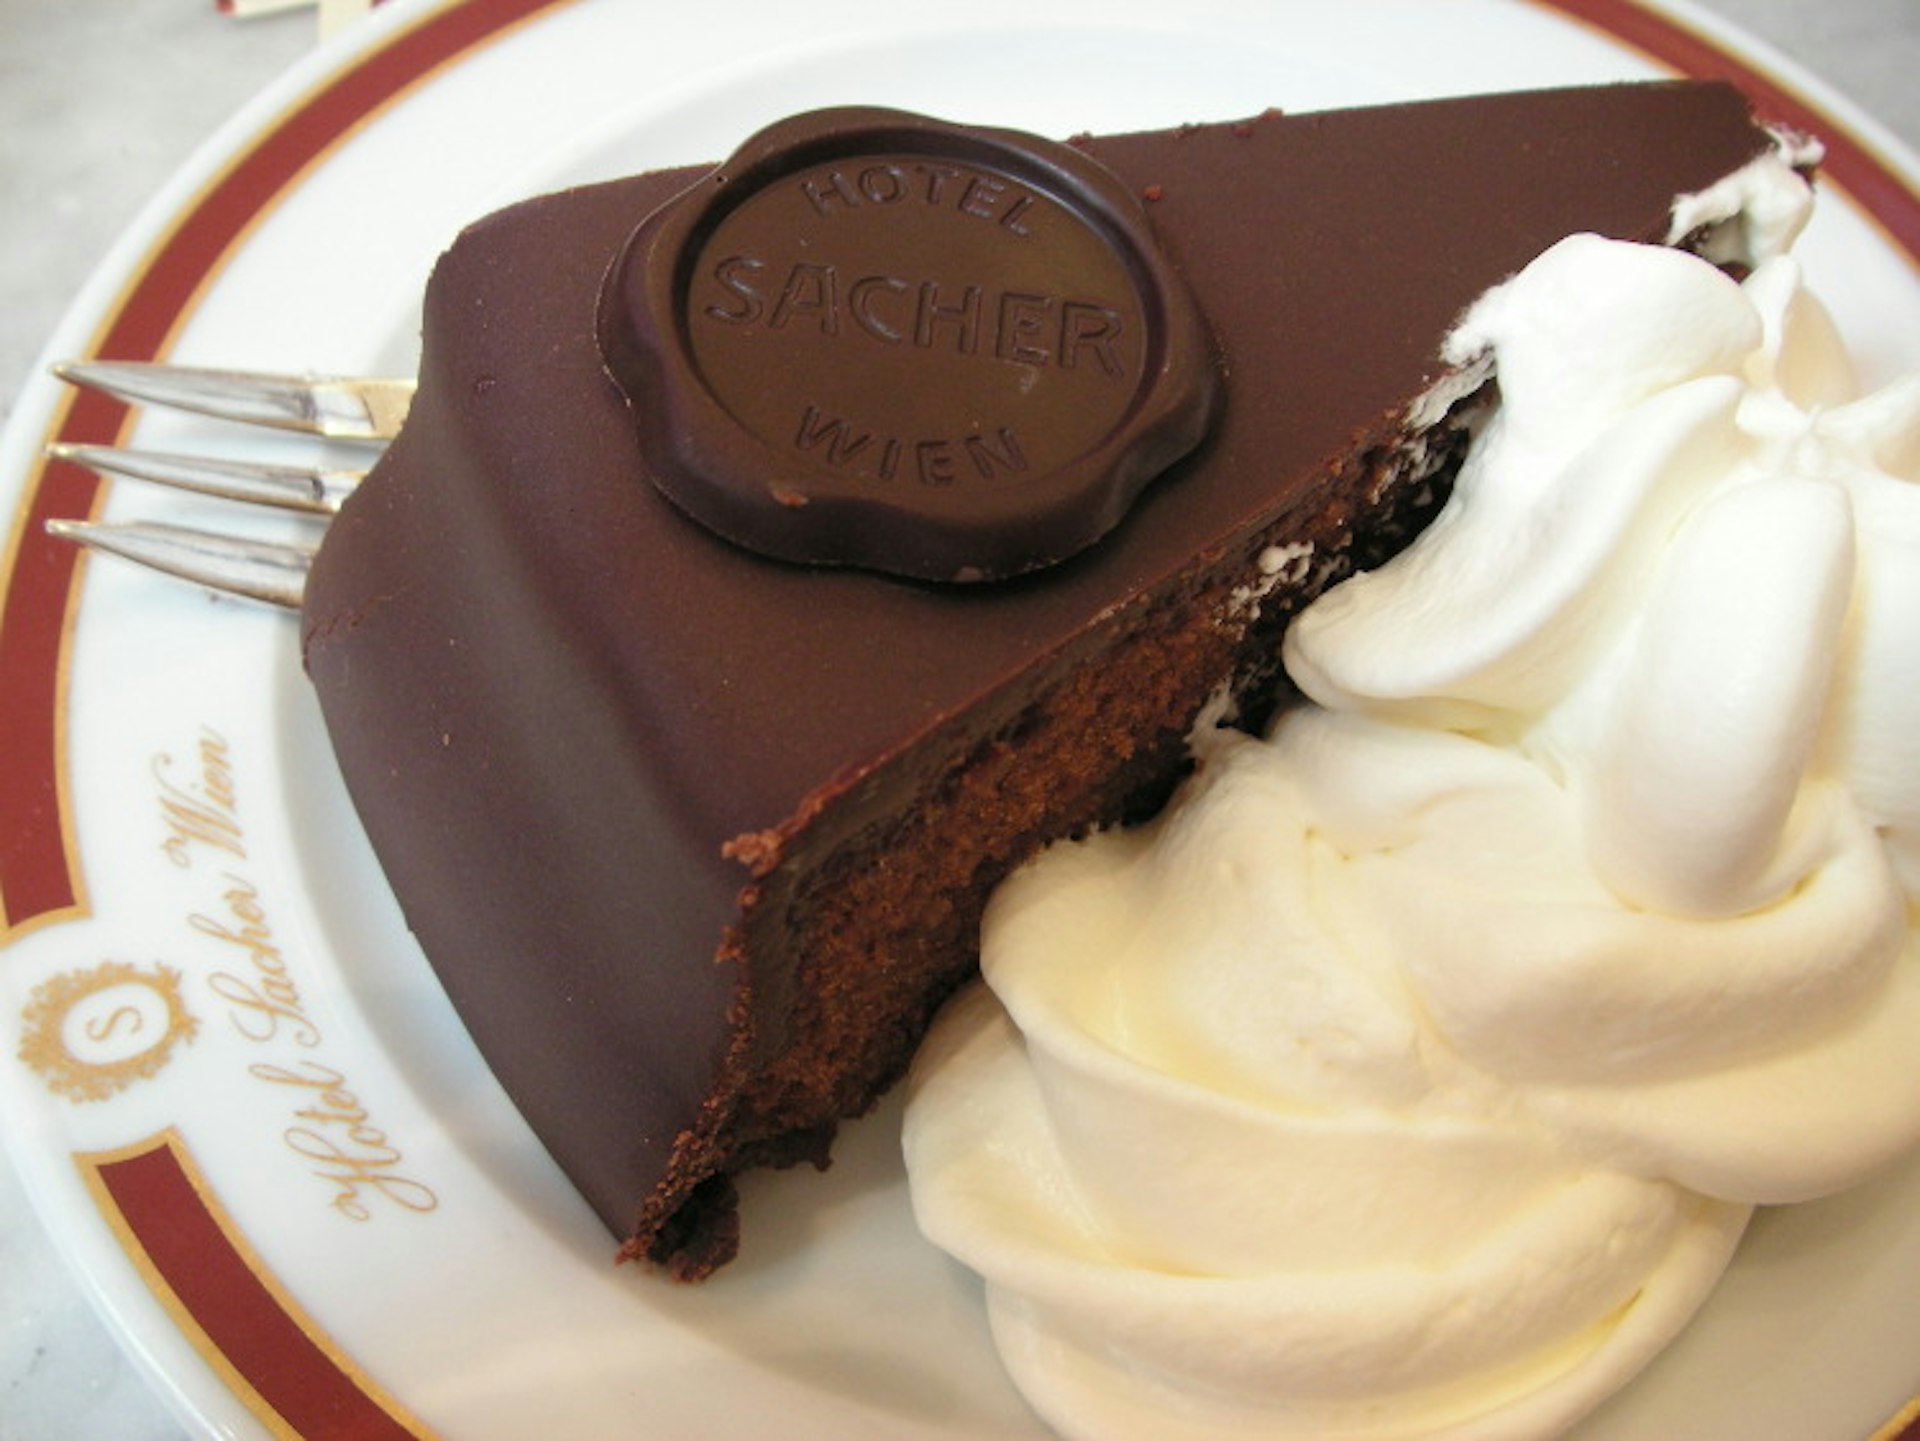 A slice of the famous Sacher Torte. Image by Fooding Around/CC BY 2.0